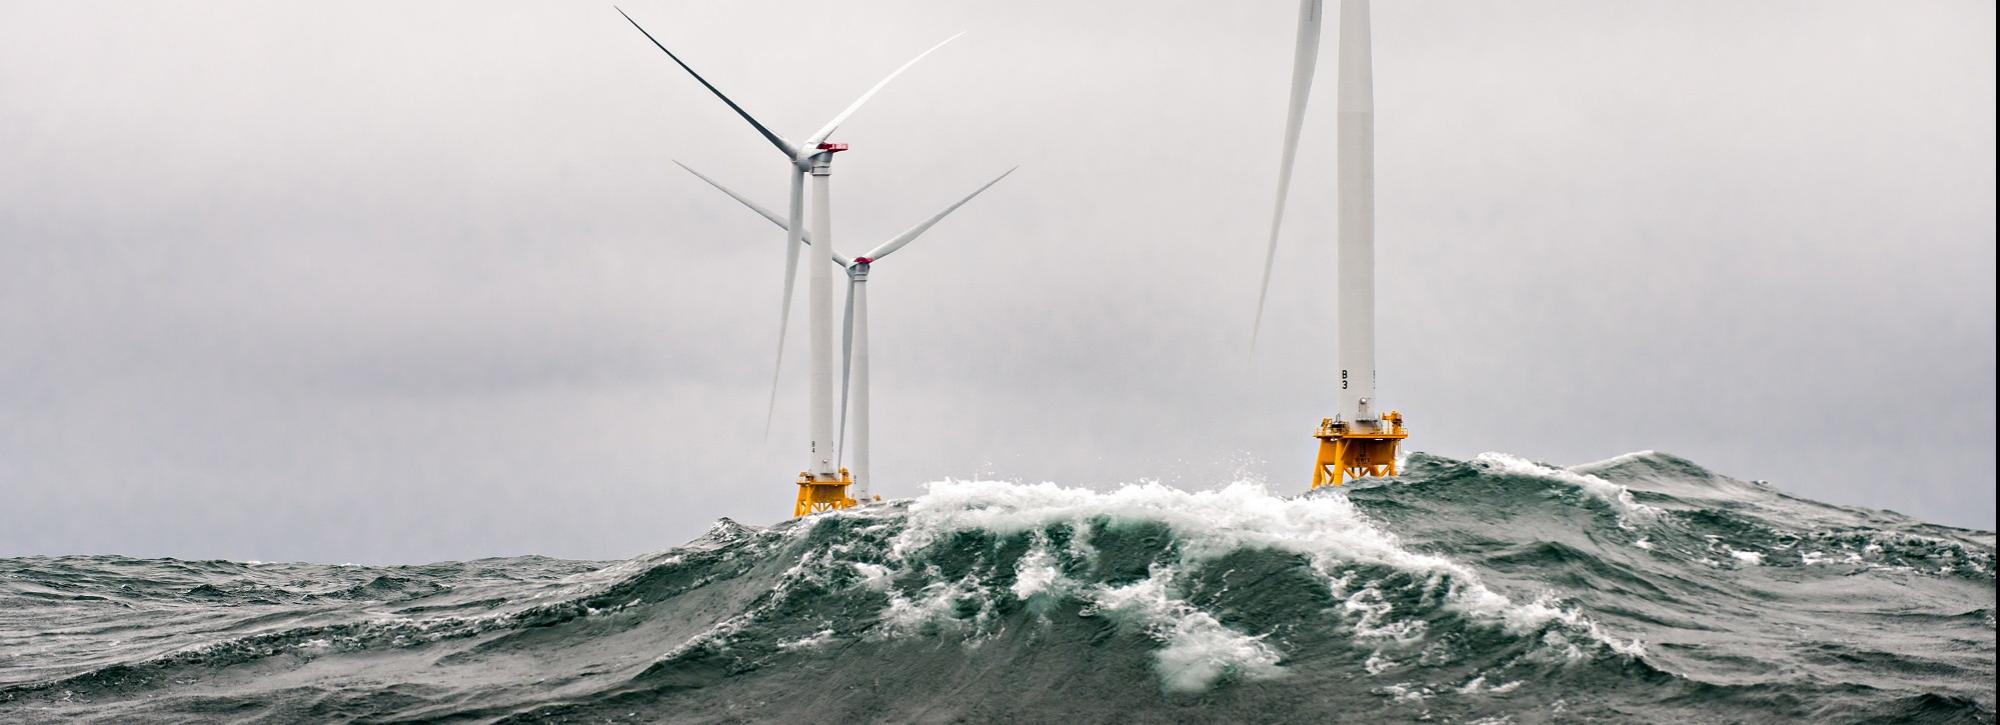 View of two wind turbines in turbulent grey sea with waves